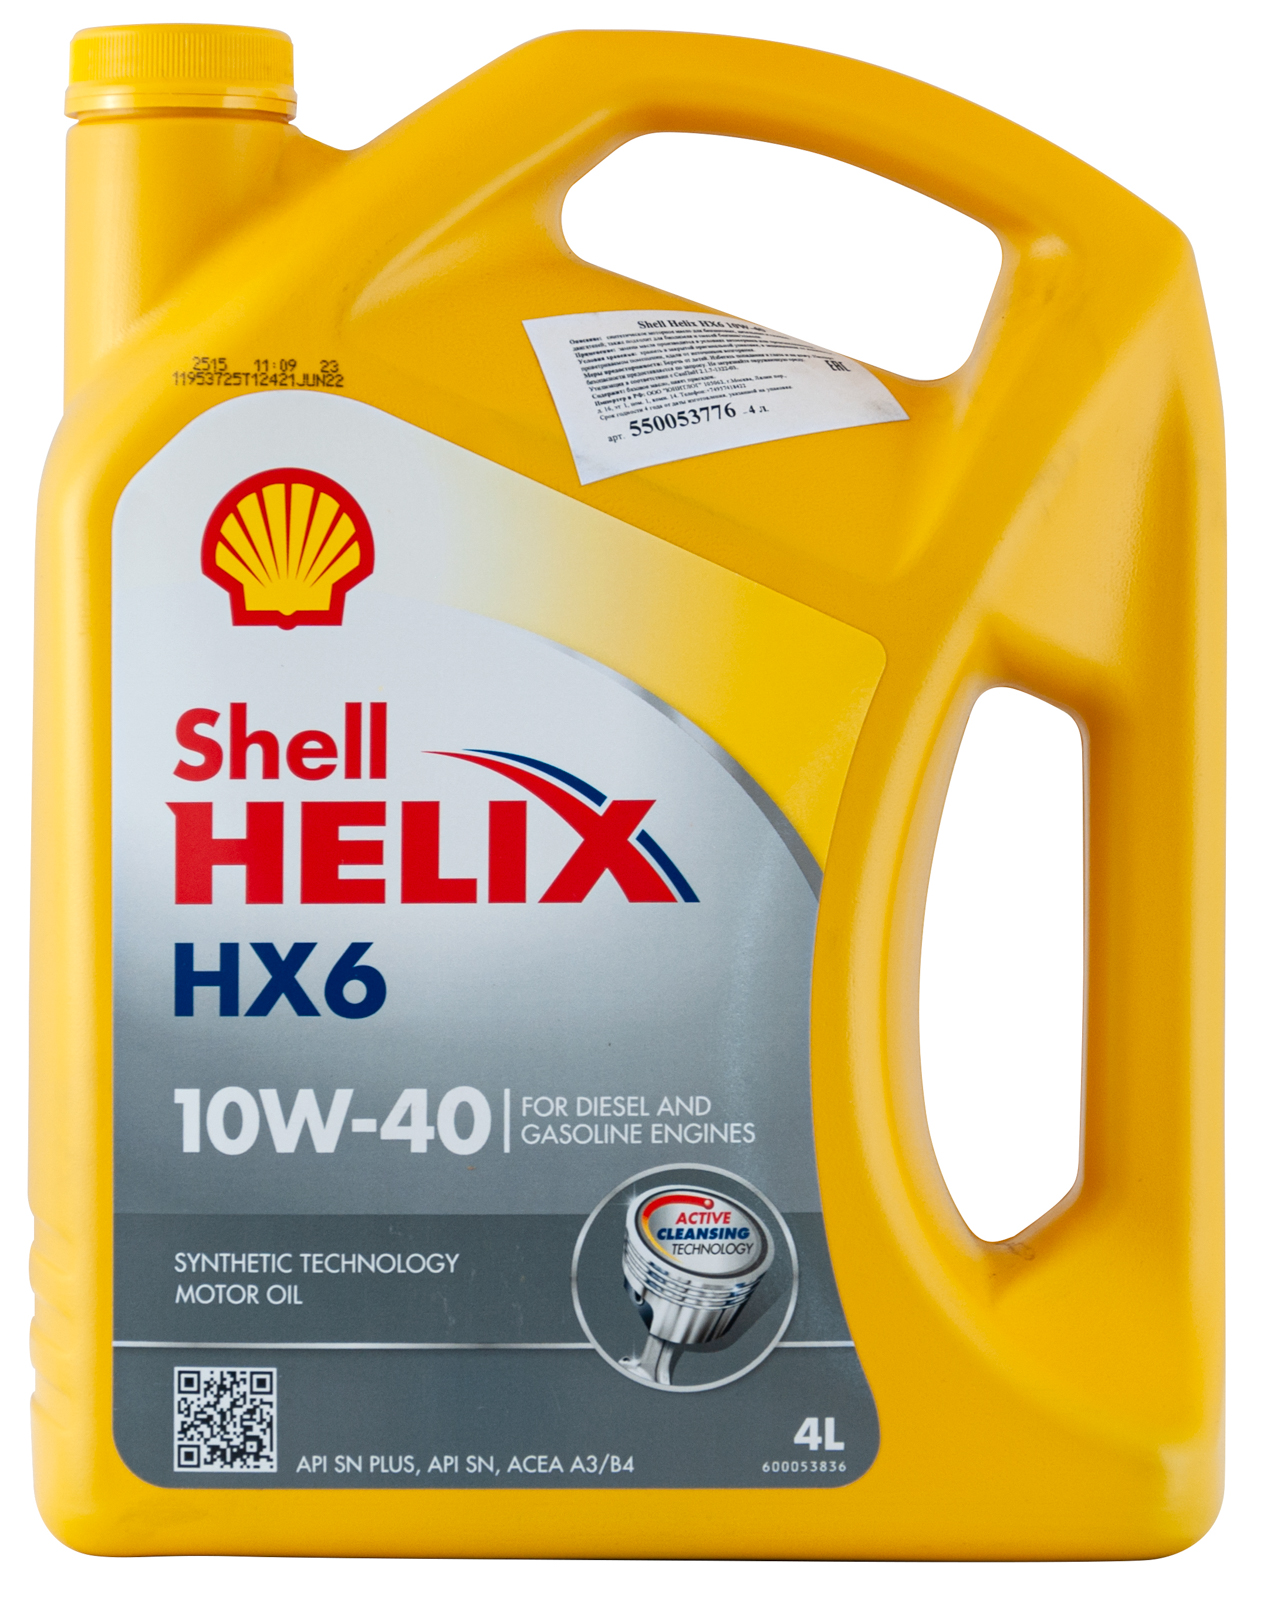 Shell Oil. Shell масло PNG. Shell Helix logo PNG. Моторное масло шелл хеликс 10w 40